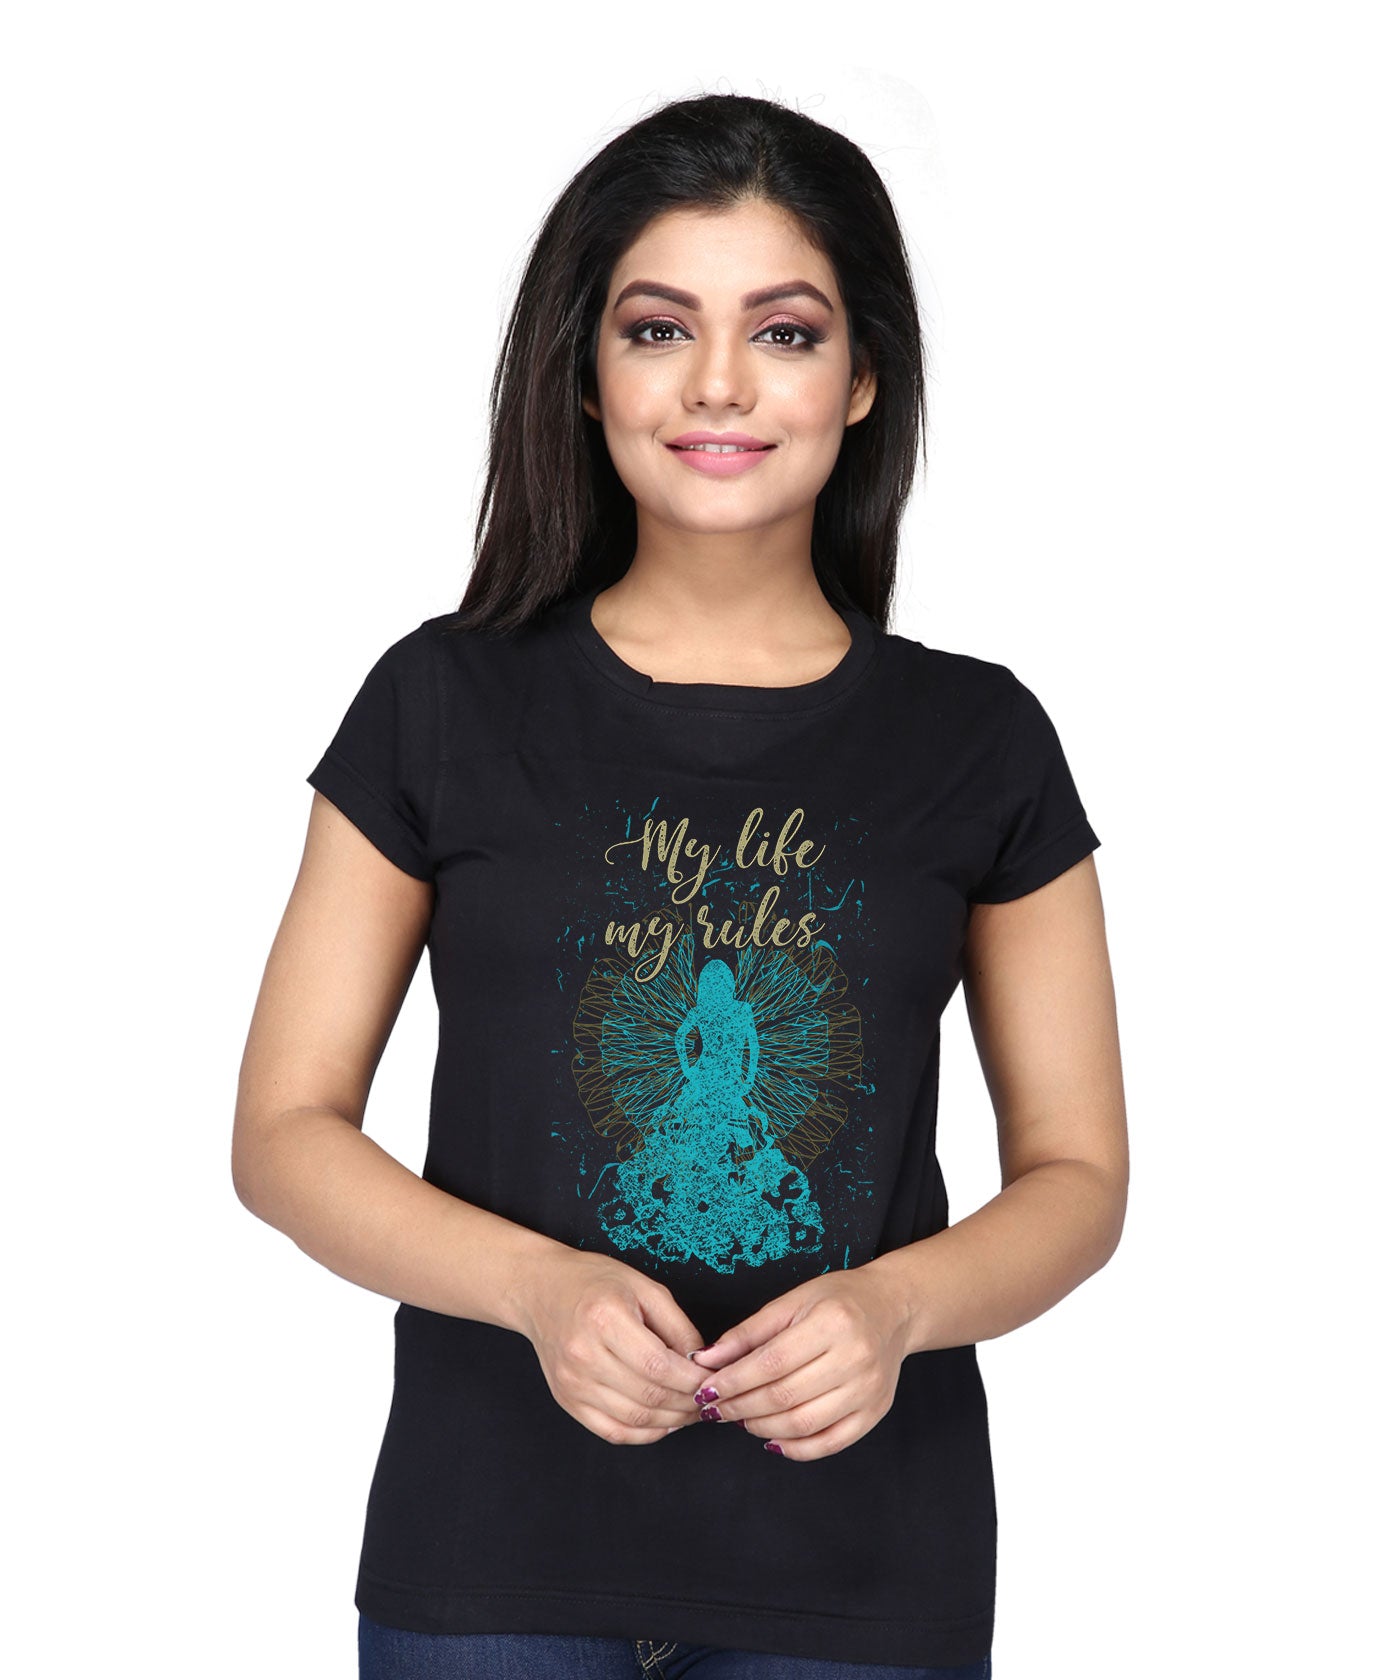 My Life My Rules - Premium Round Neck Cotton Tees for Women - Black